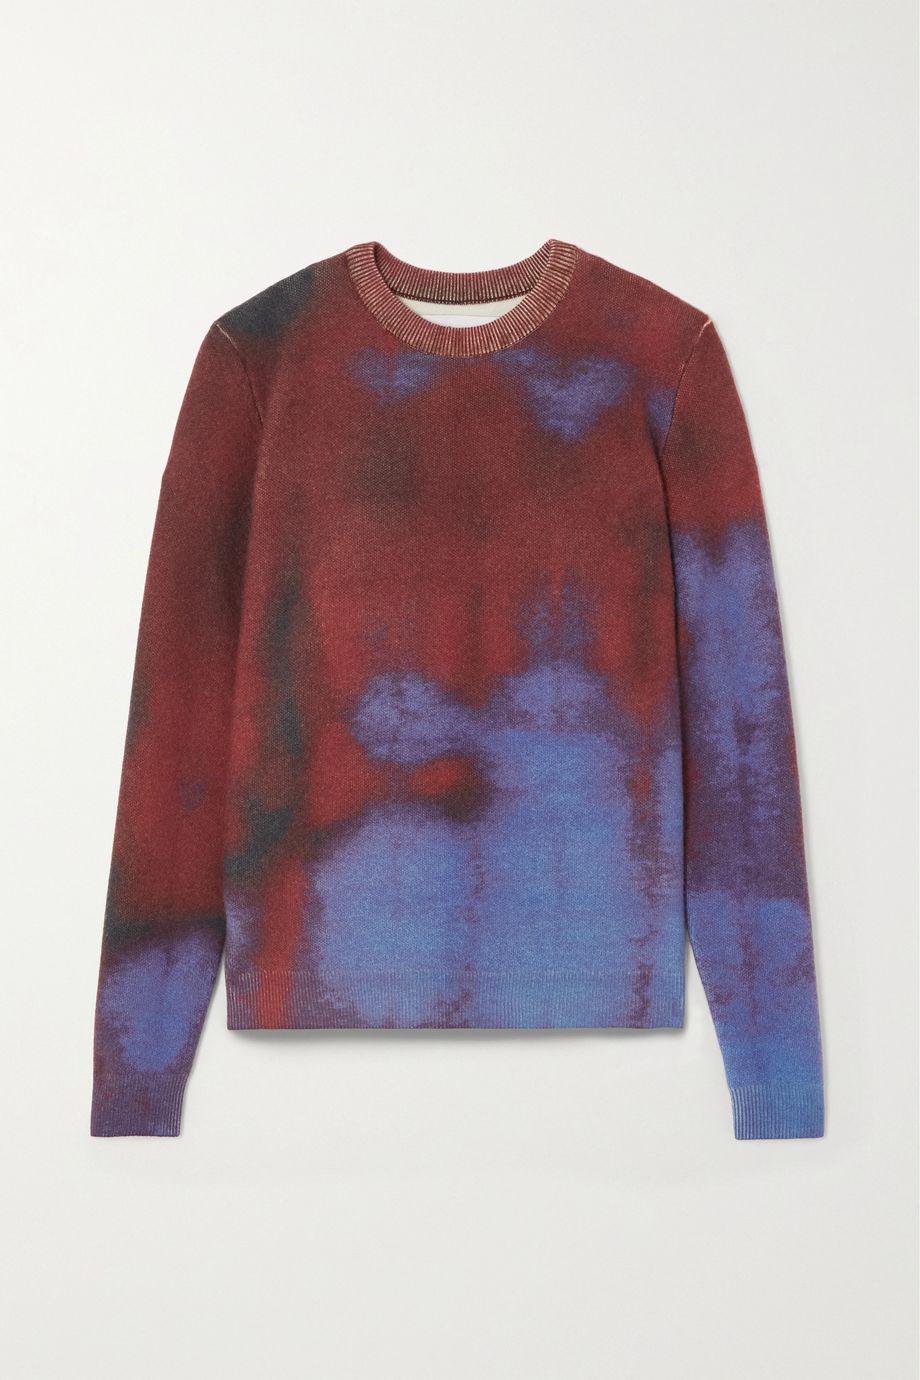 Gonzo tie-dyed cashmere sweater by AZTECH MOUNTAIN